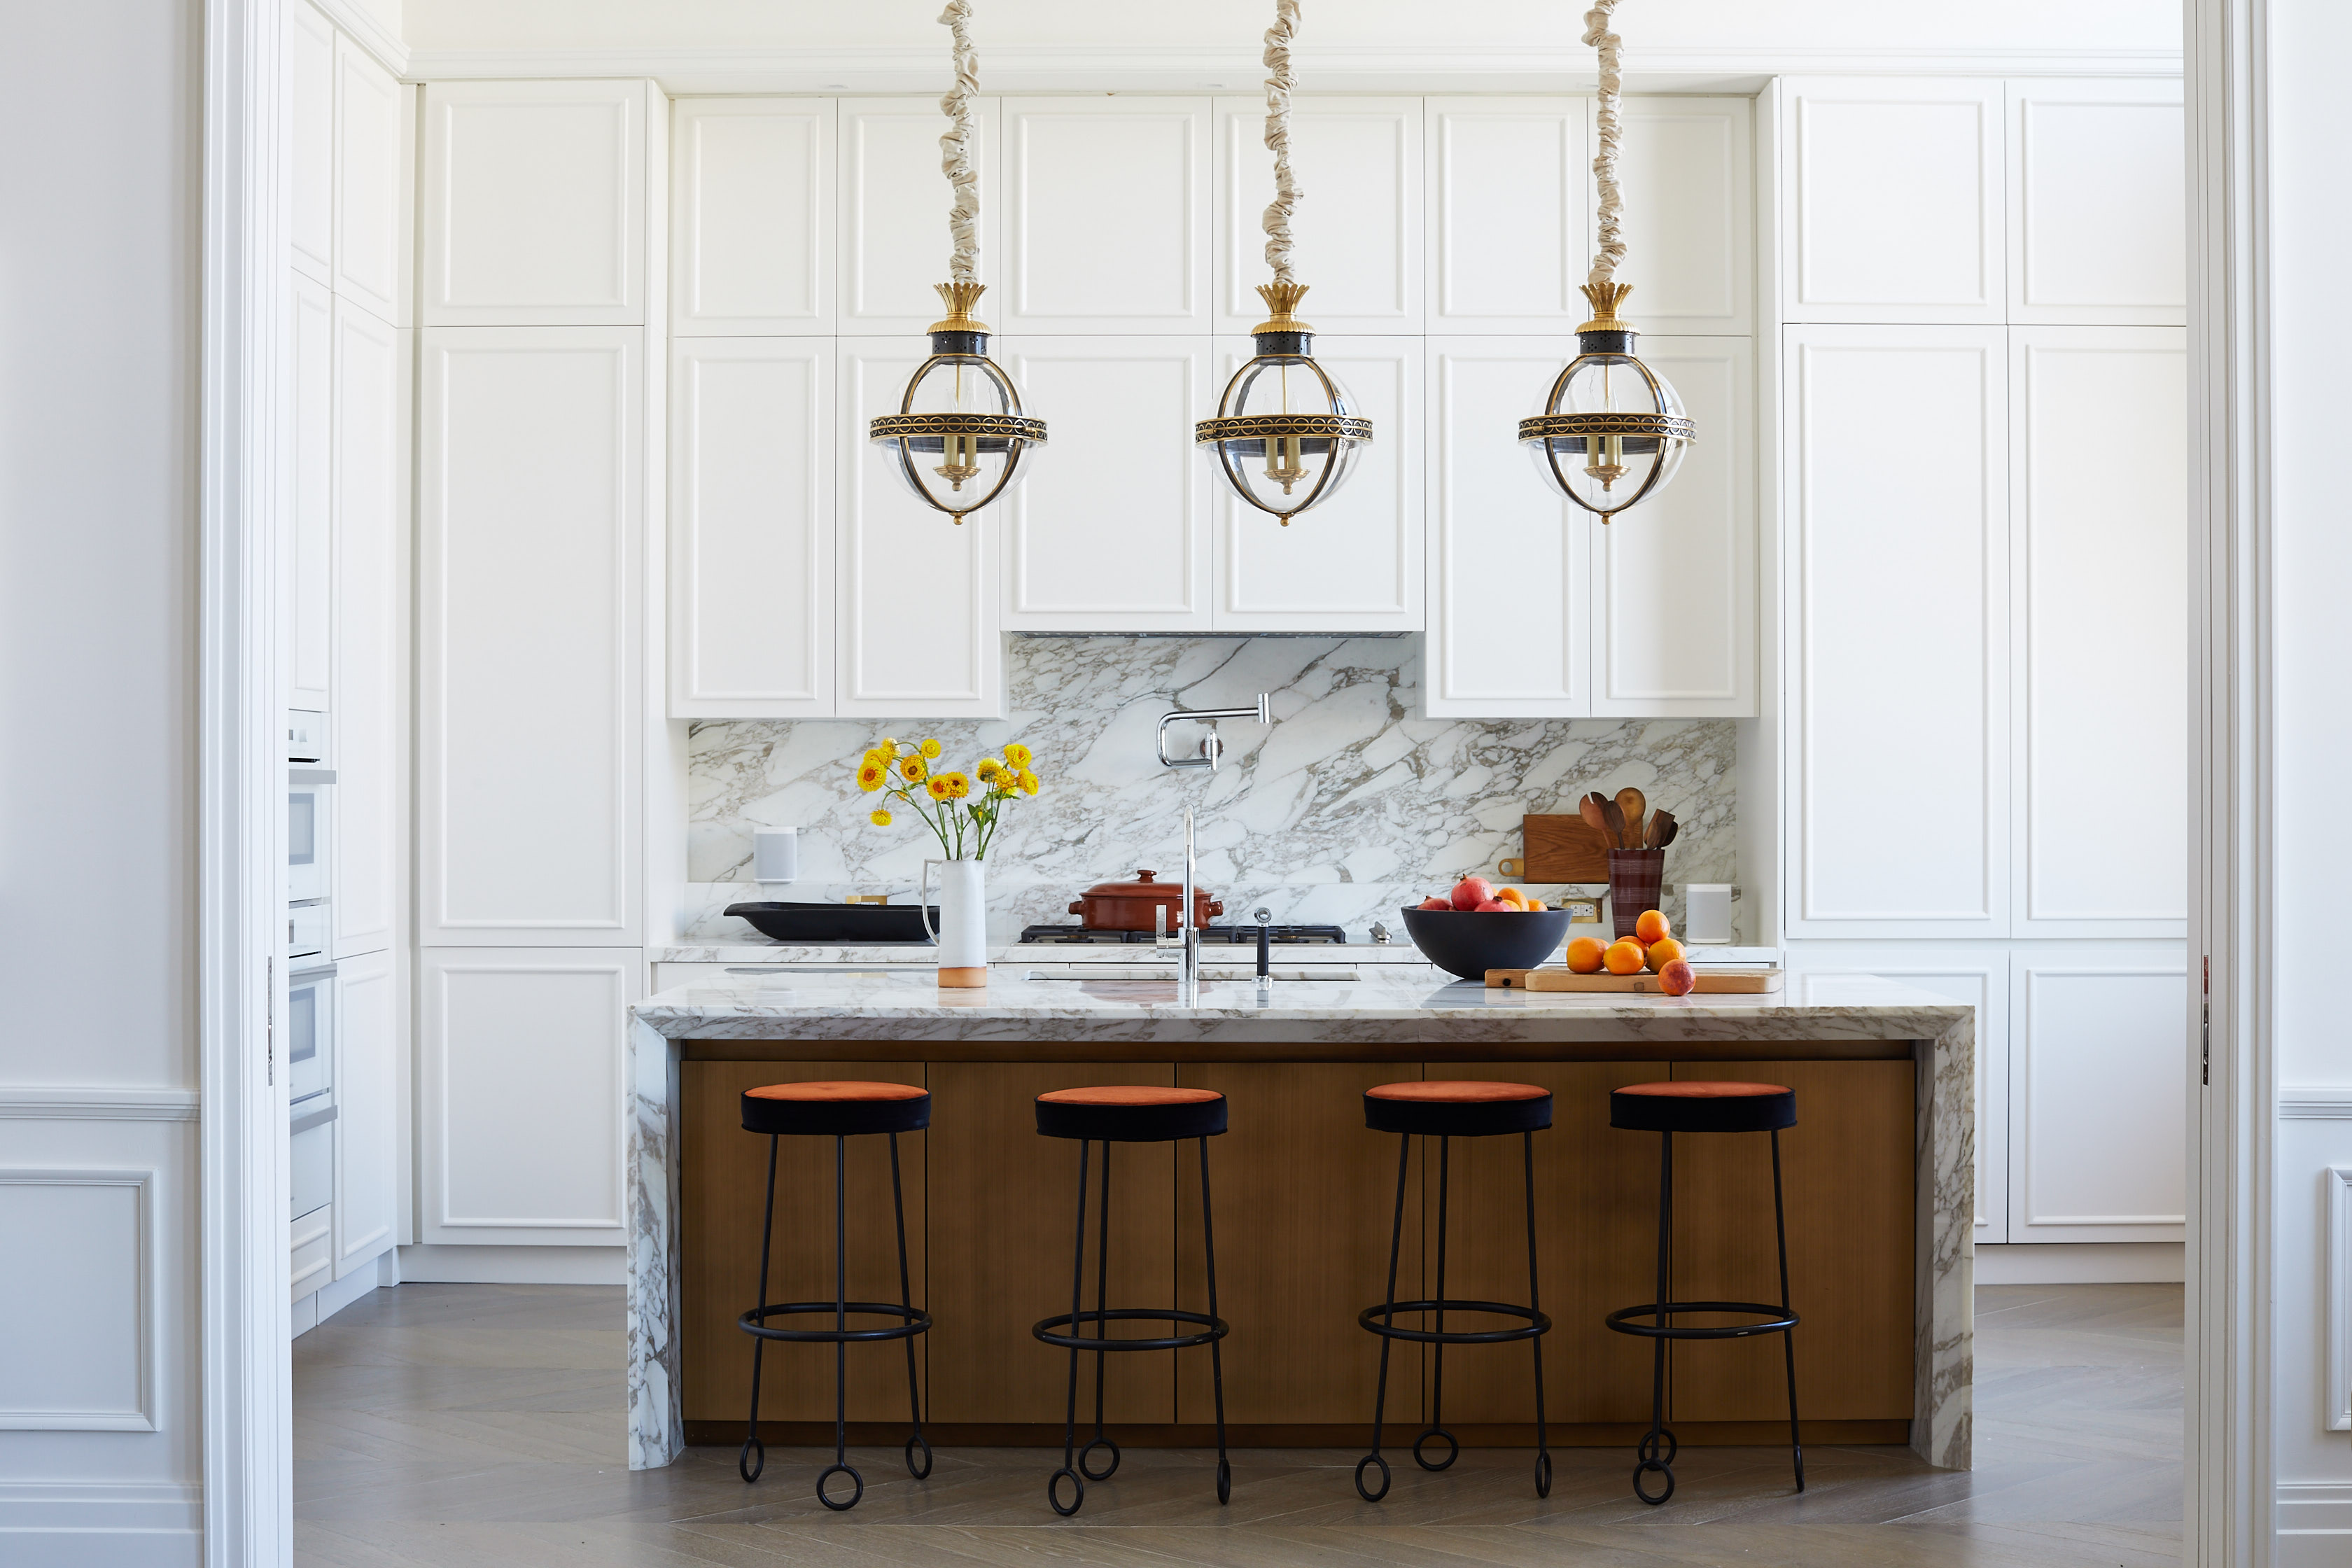 Kitchen island with vintage stools for Elle Decor Magazine by Alison Gootee Photography